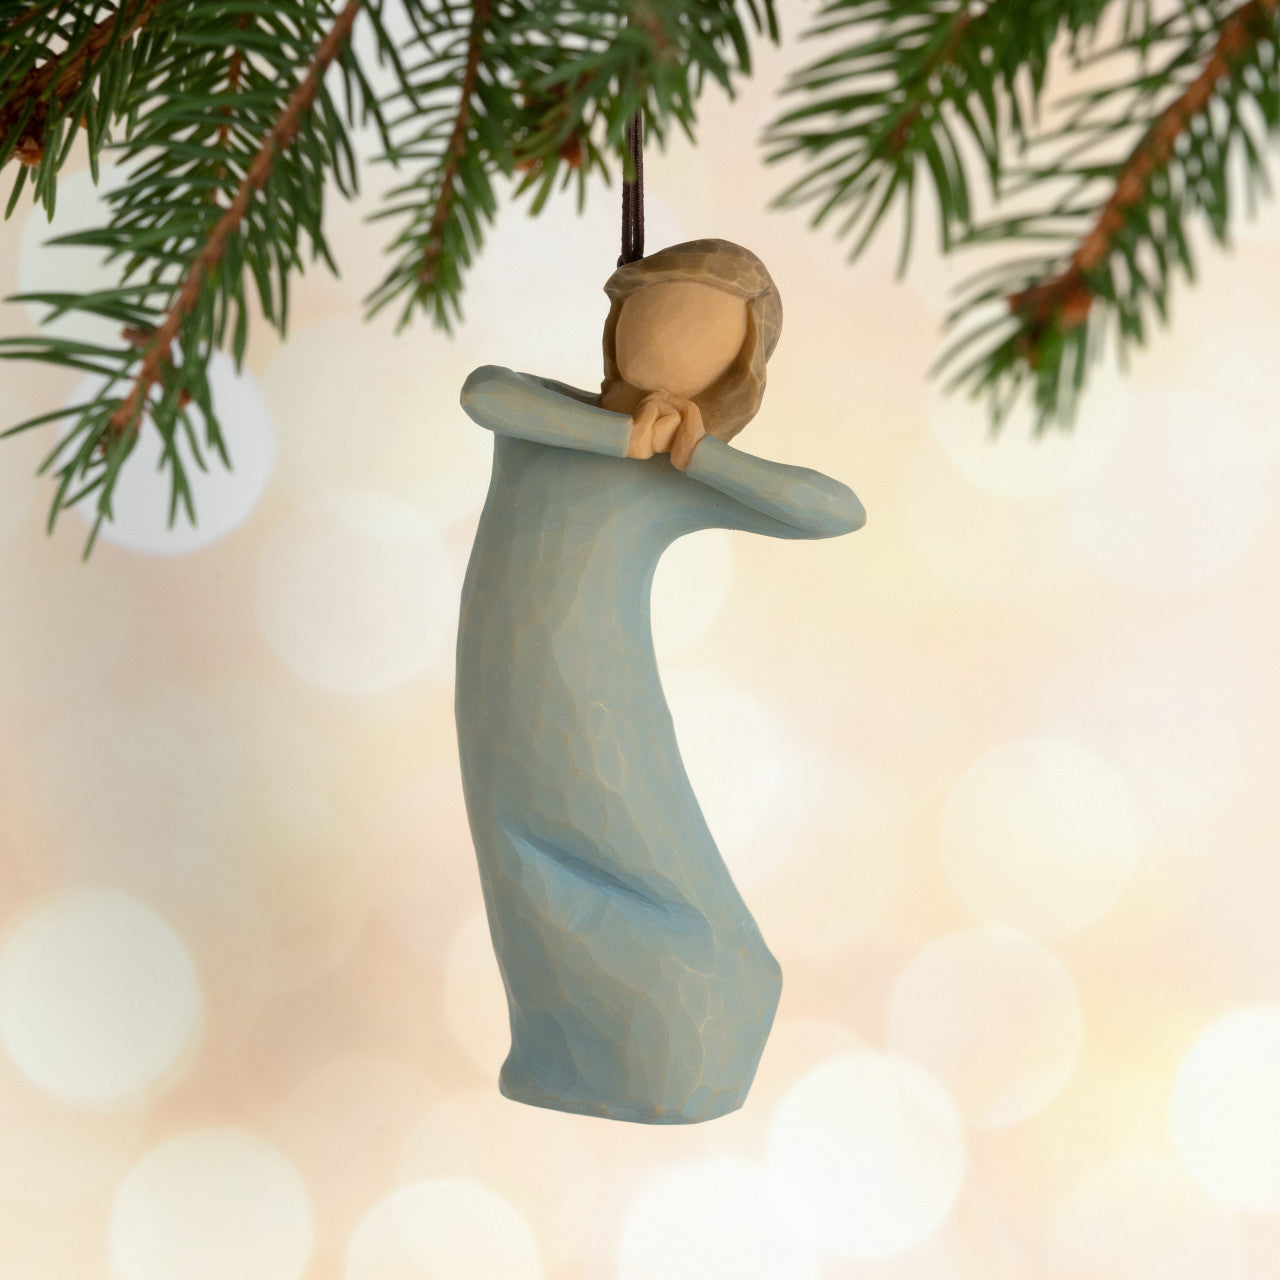 Willow Tree® Journey Ornament by Demdaco Ornament Willow Tree   